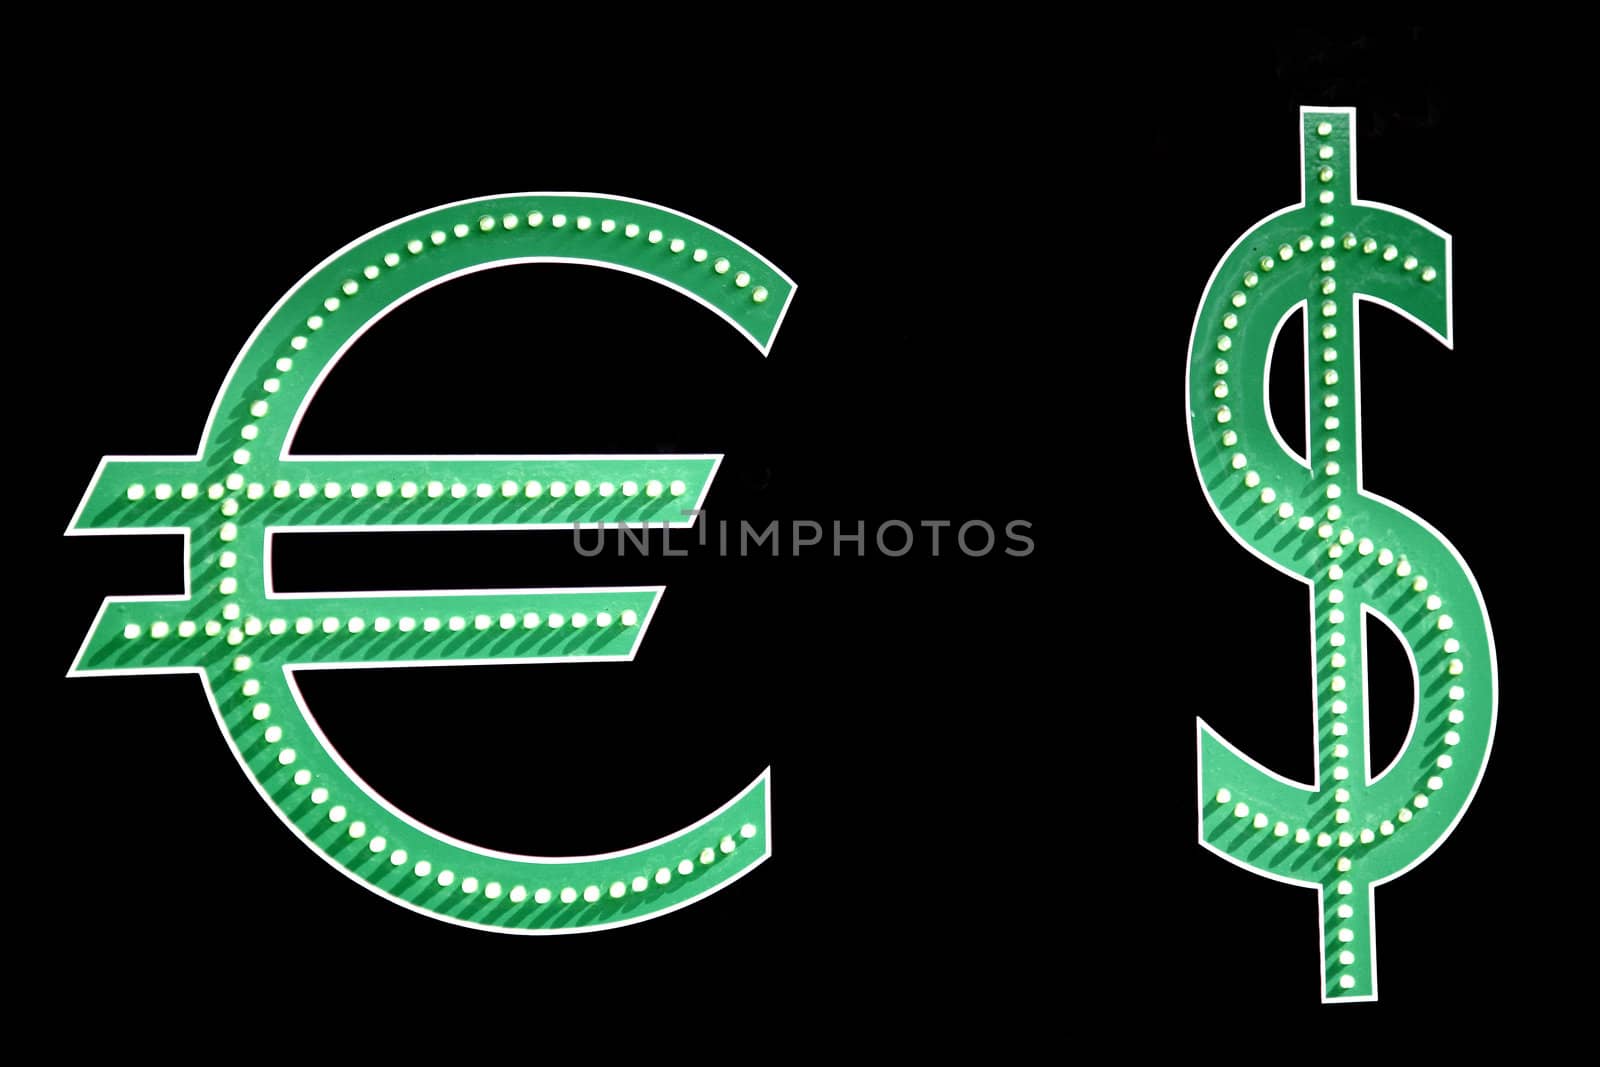 Euro and dollar signs by ABCDK